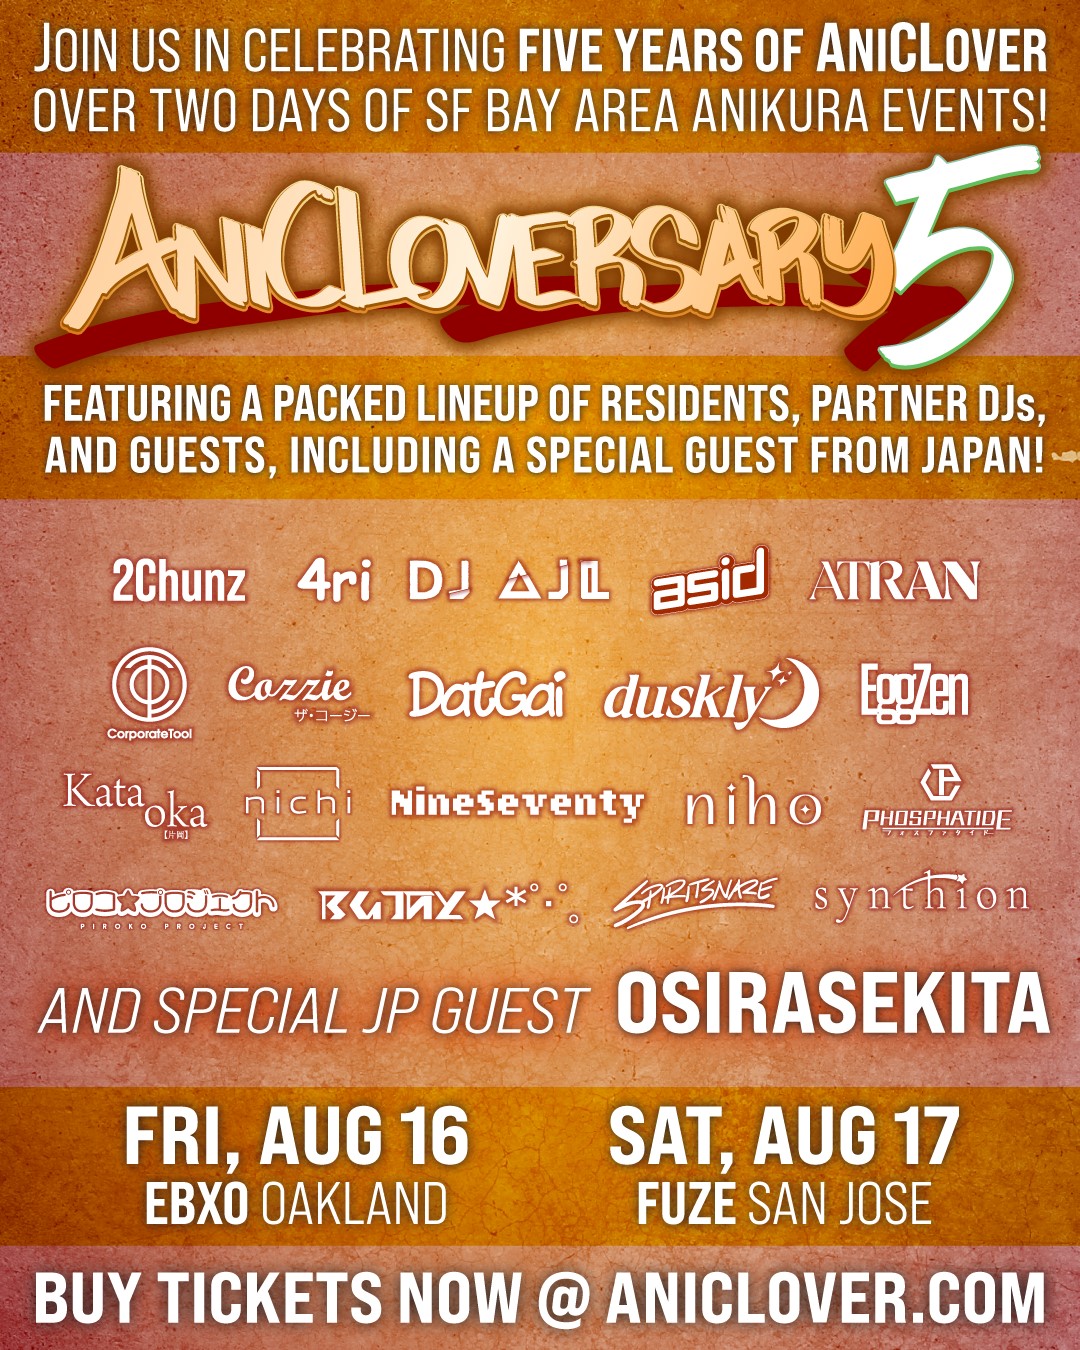 AniCLoversary 5 | Aug 16 & 17 in Oakland and San Jose@ DNA Lounge Apr 21